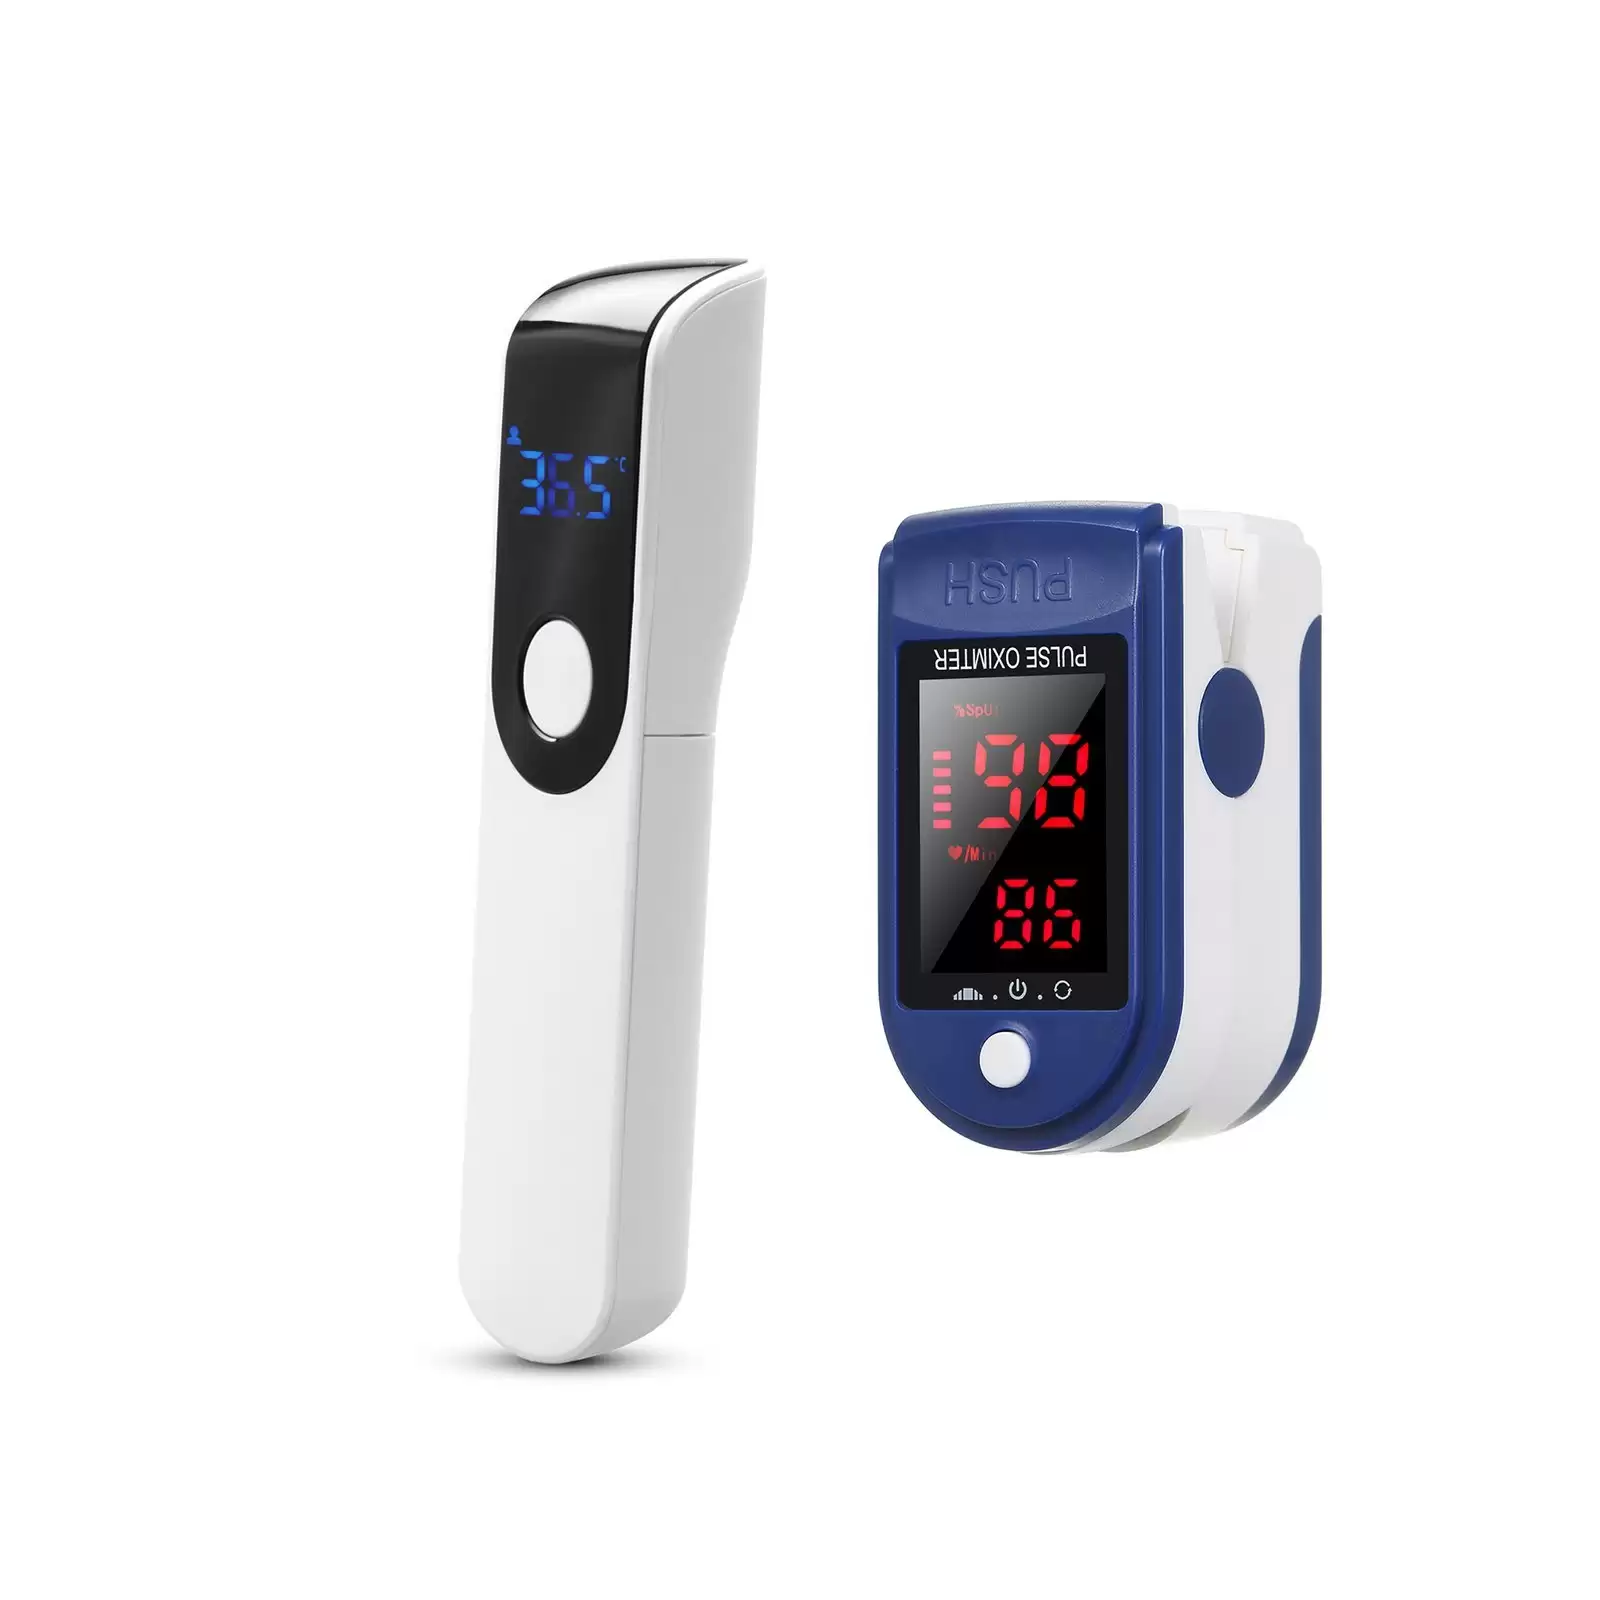 Get Extra 82% Discount On Blood Oxygen Monitor+Ir-Fm01 Non-Contact Thermometer With This Discount Coupon At Cafago